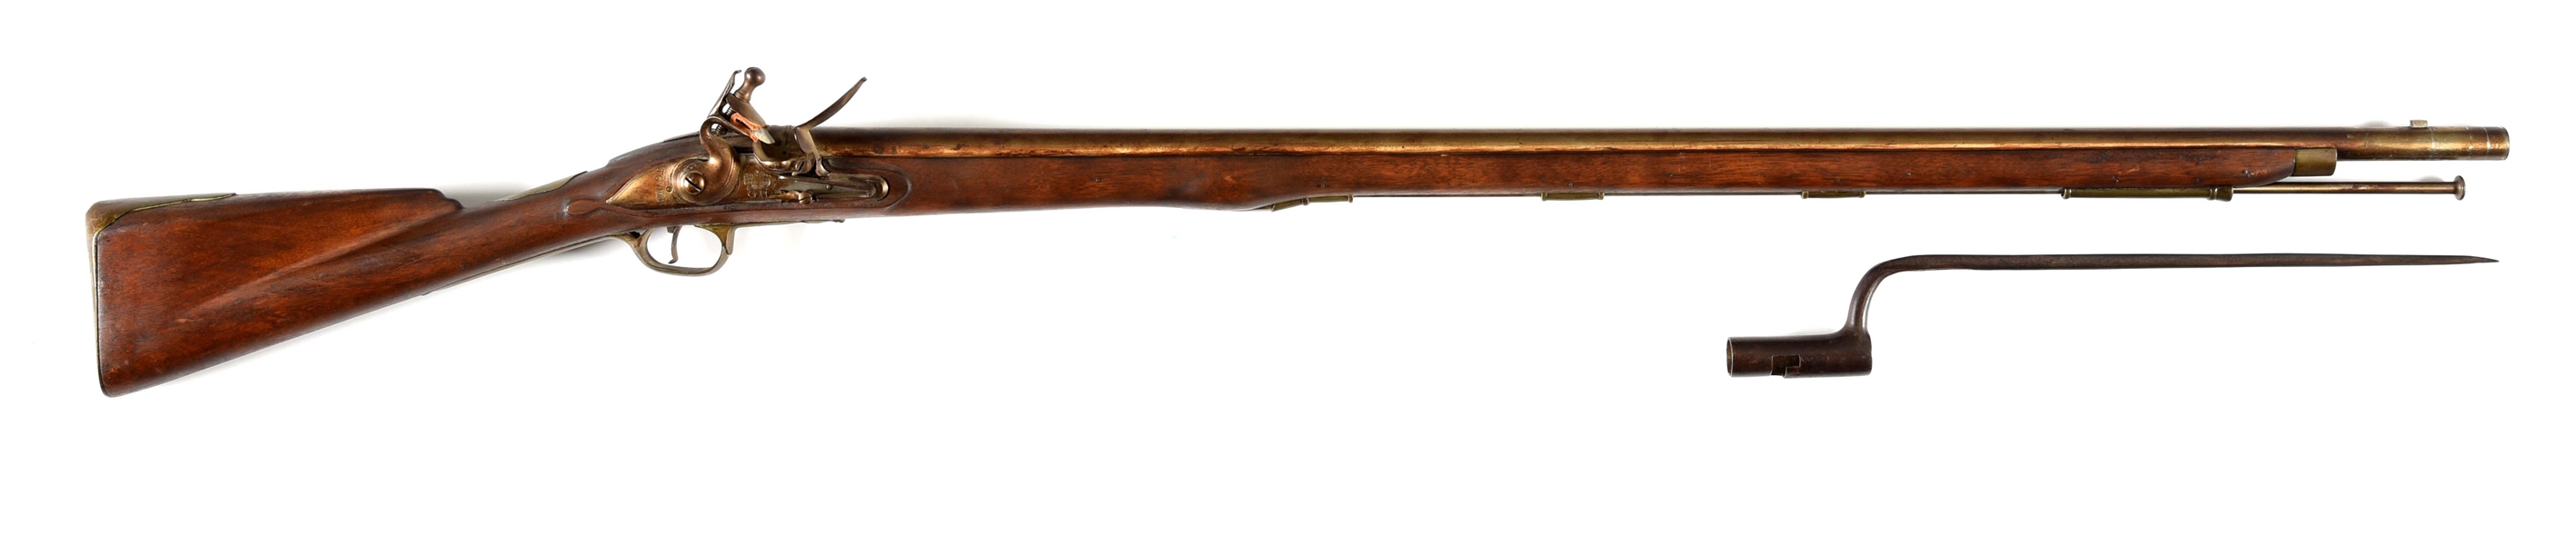 (A) REPRODUCTION TOWER BROWN BESS FLINTLOCK MUSKET WITH BAYONET.